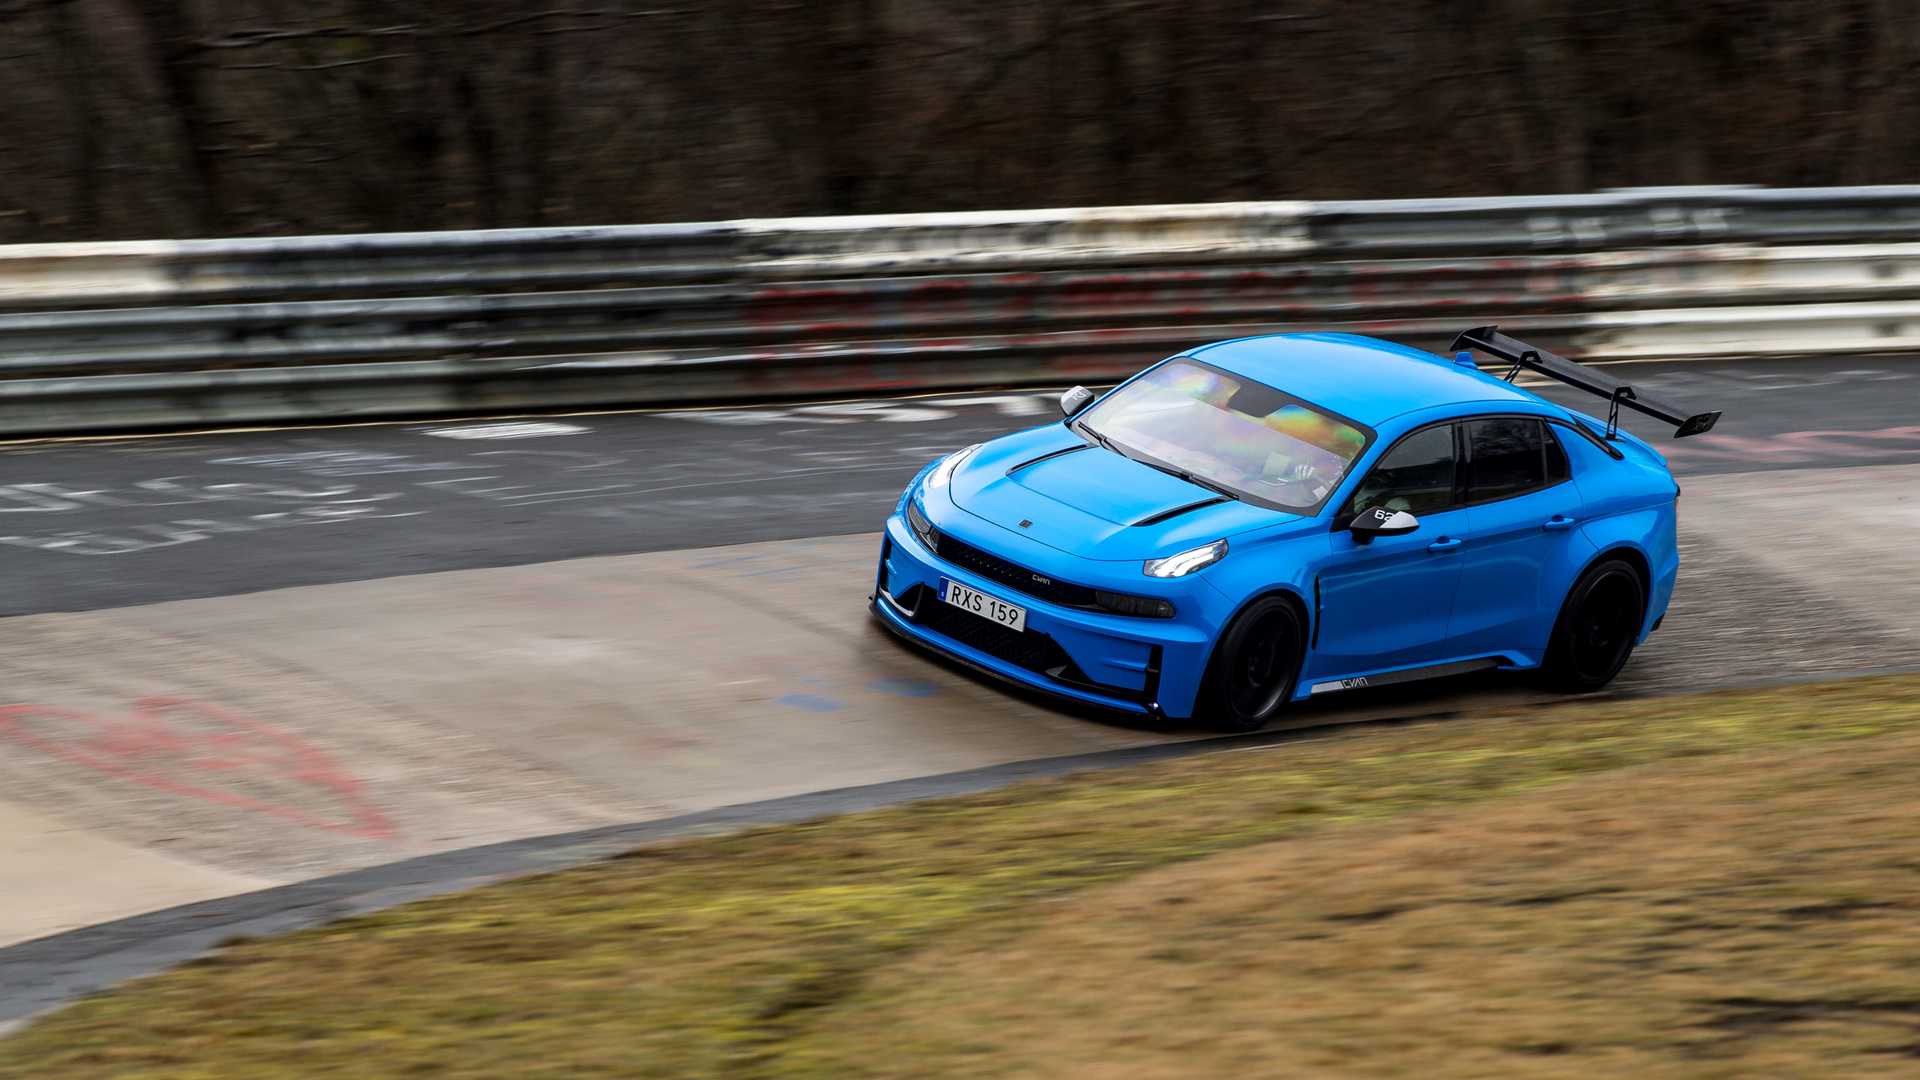 lynk-co-03-cyan-concept-sets-front-wheel-drive-and-four-door-nurburgring-records-7